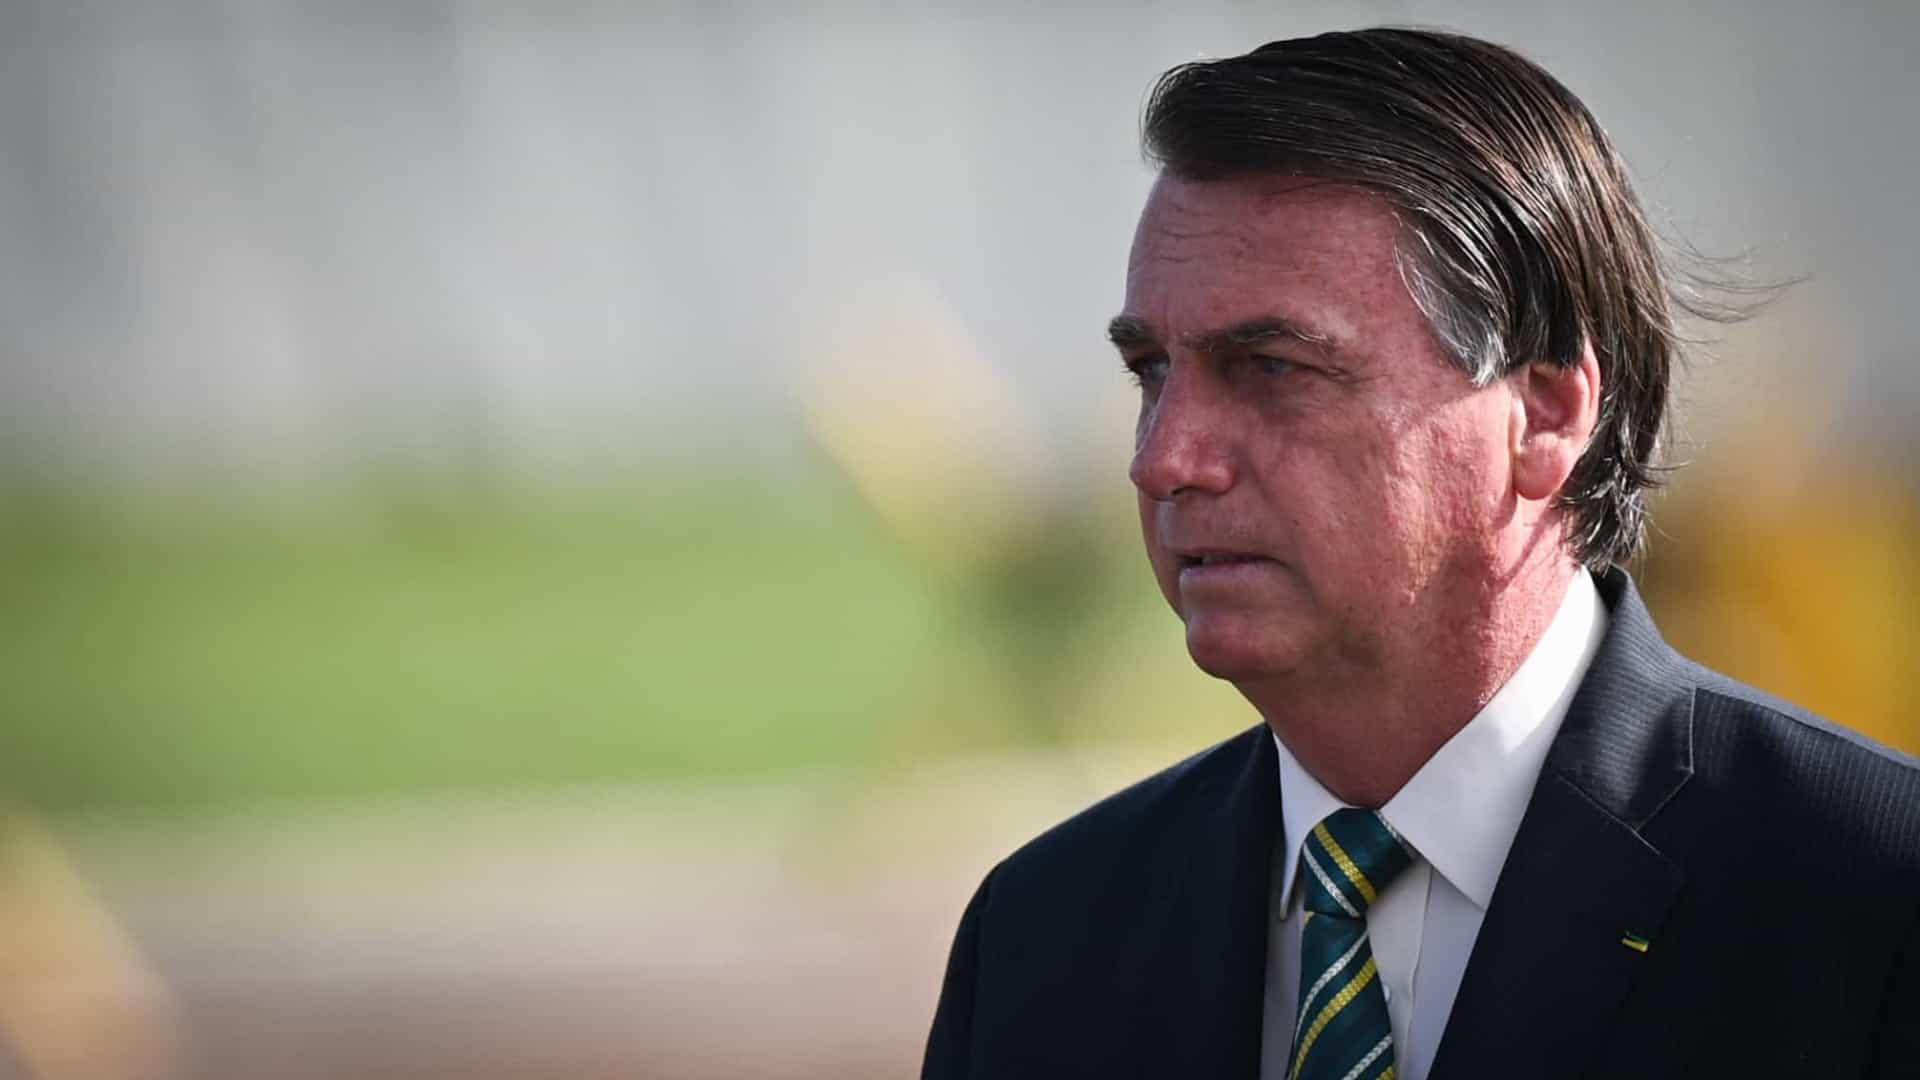 The share of the population that disapproves the Jair Bolsonaro government increased for the first time since March 2020, according to a survey released on Monday, January 18th, by XP Investments in partnership with the Social, Political and Economic Research Institute (IPESPE).